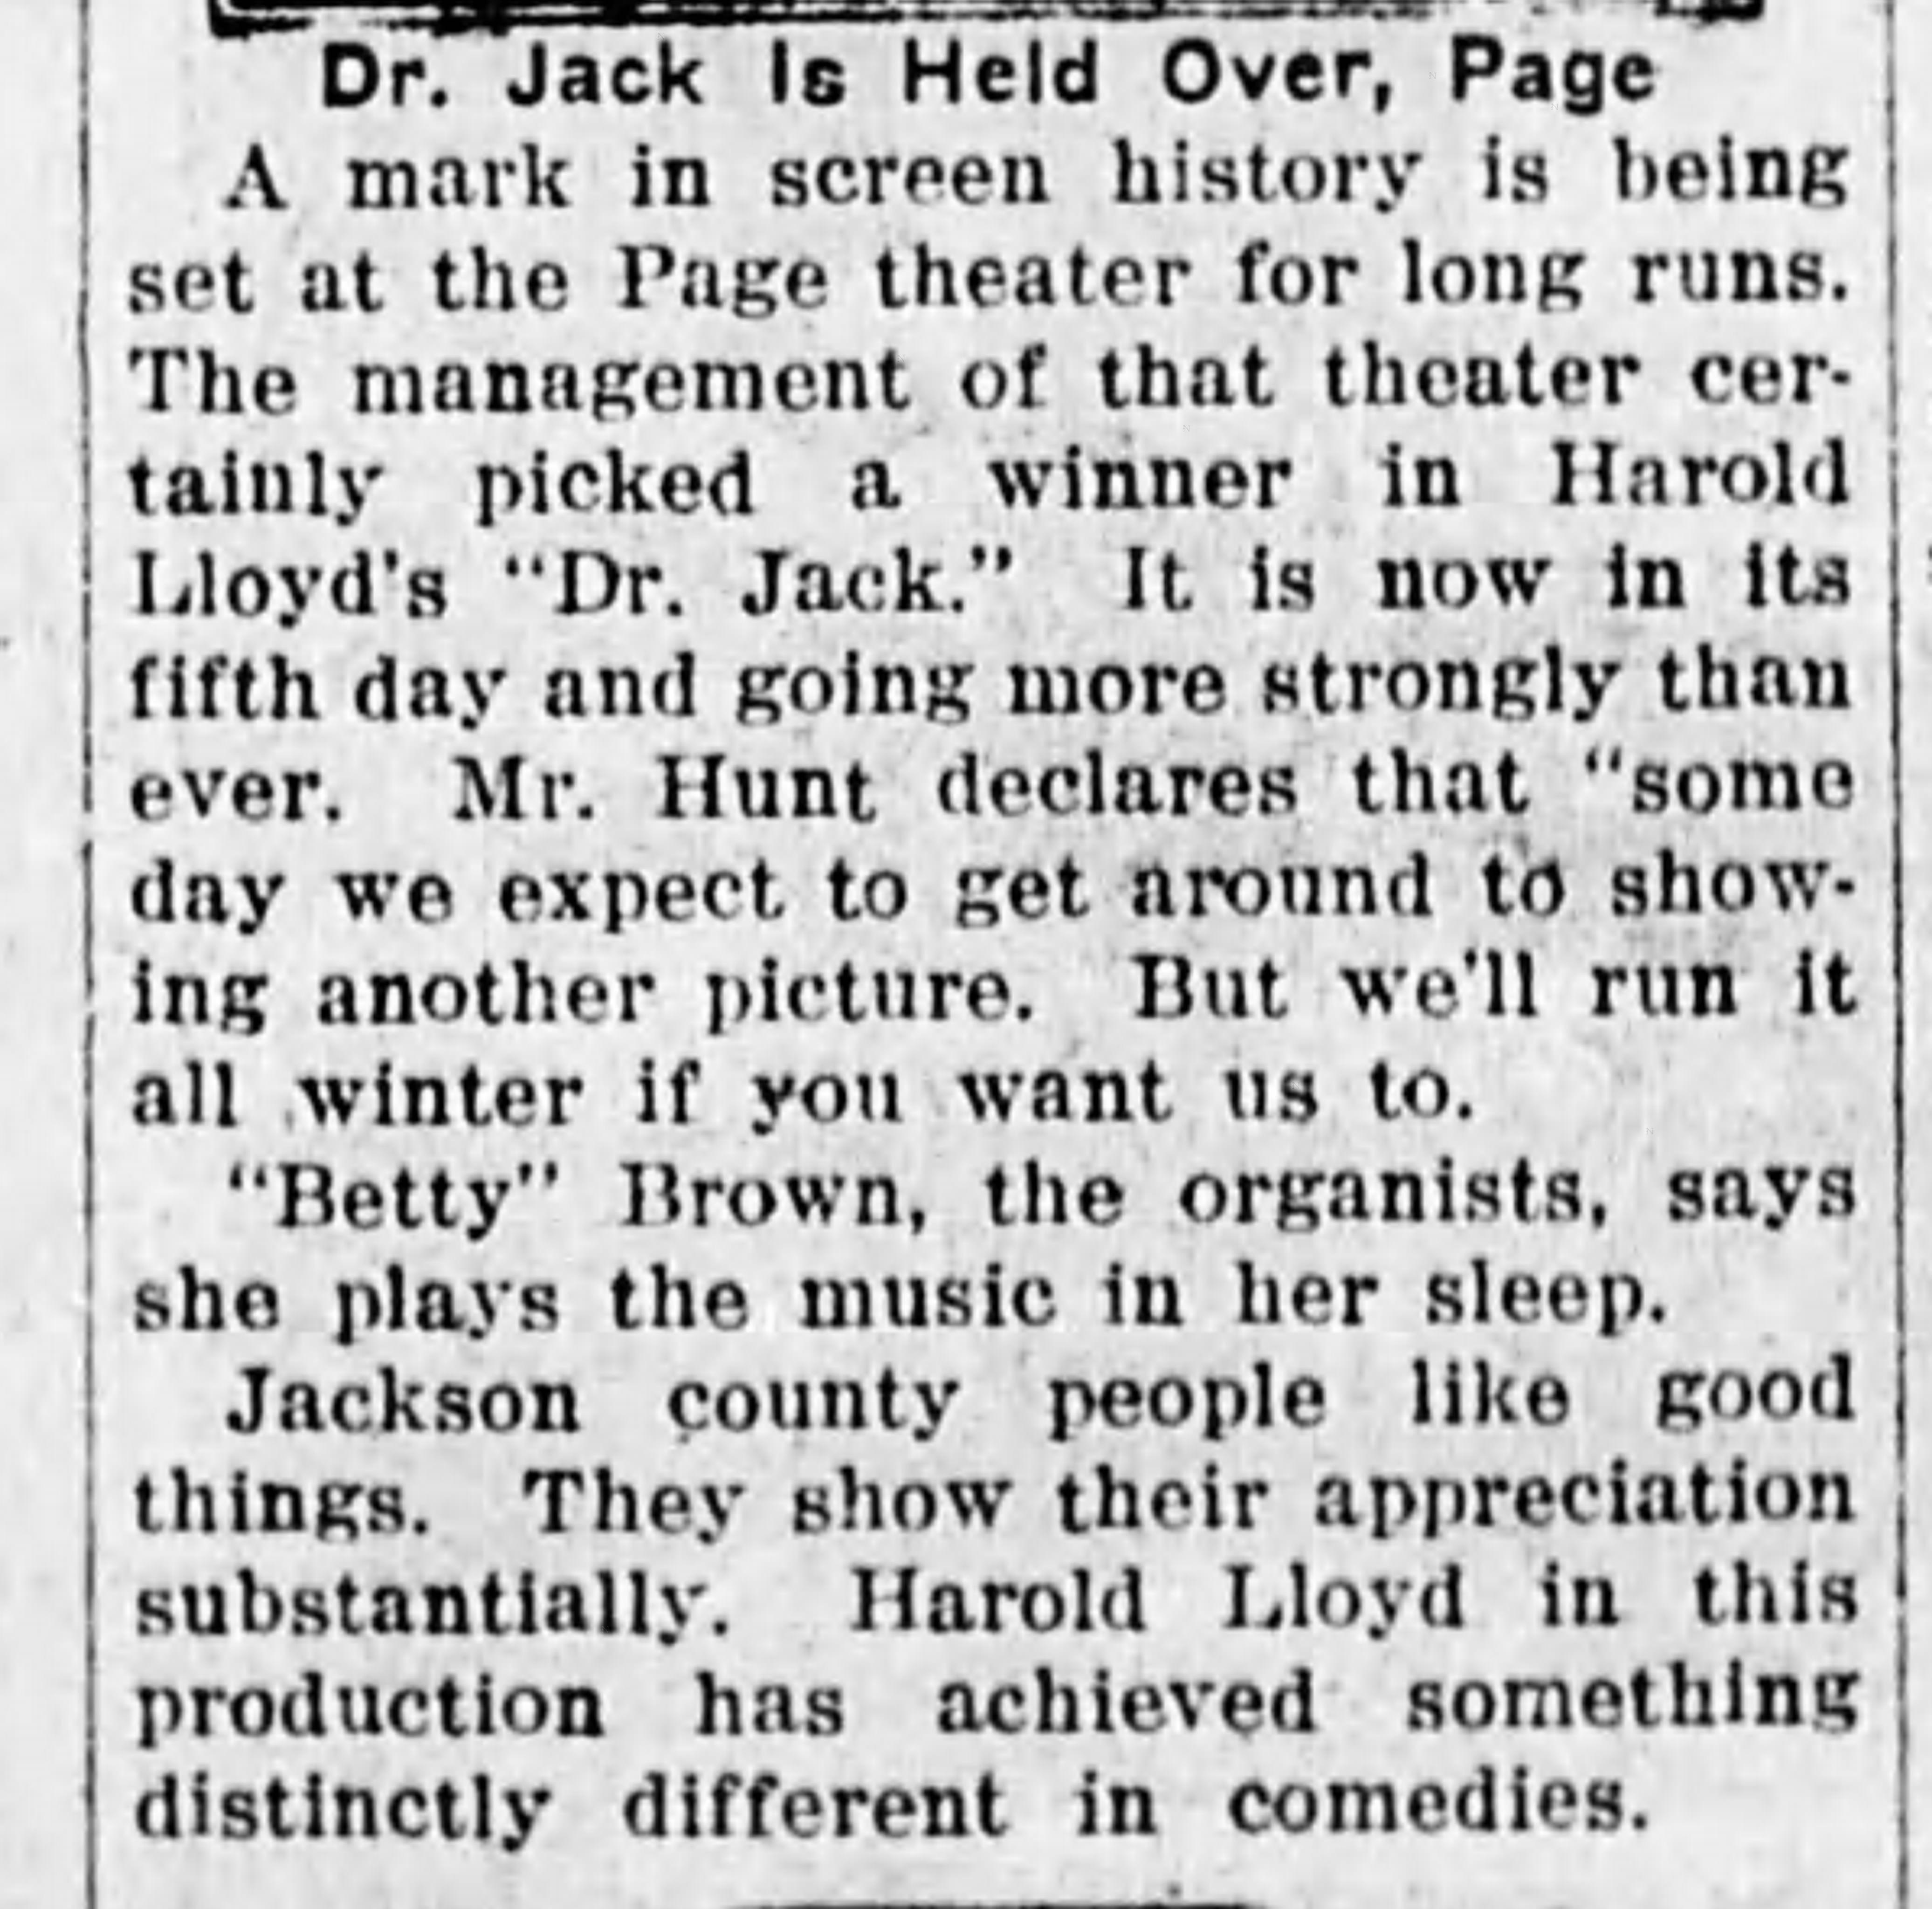 Dr. Jack stays on at the Page theater, 1923